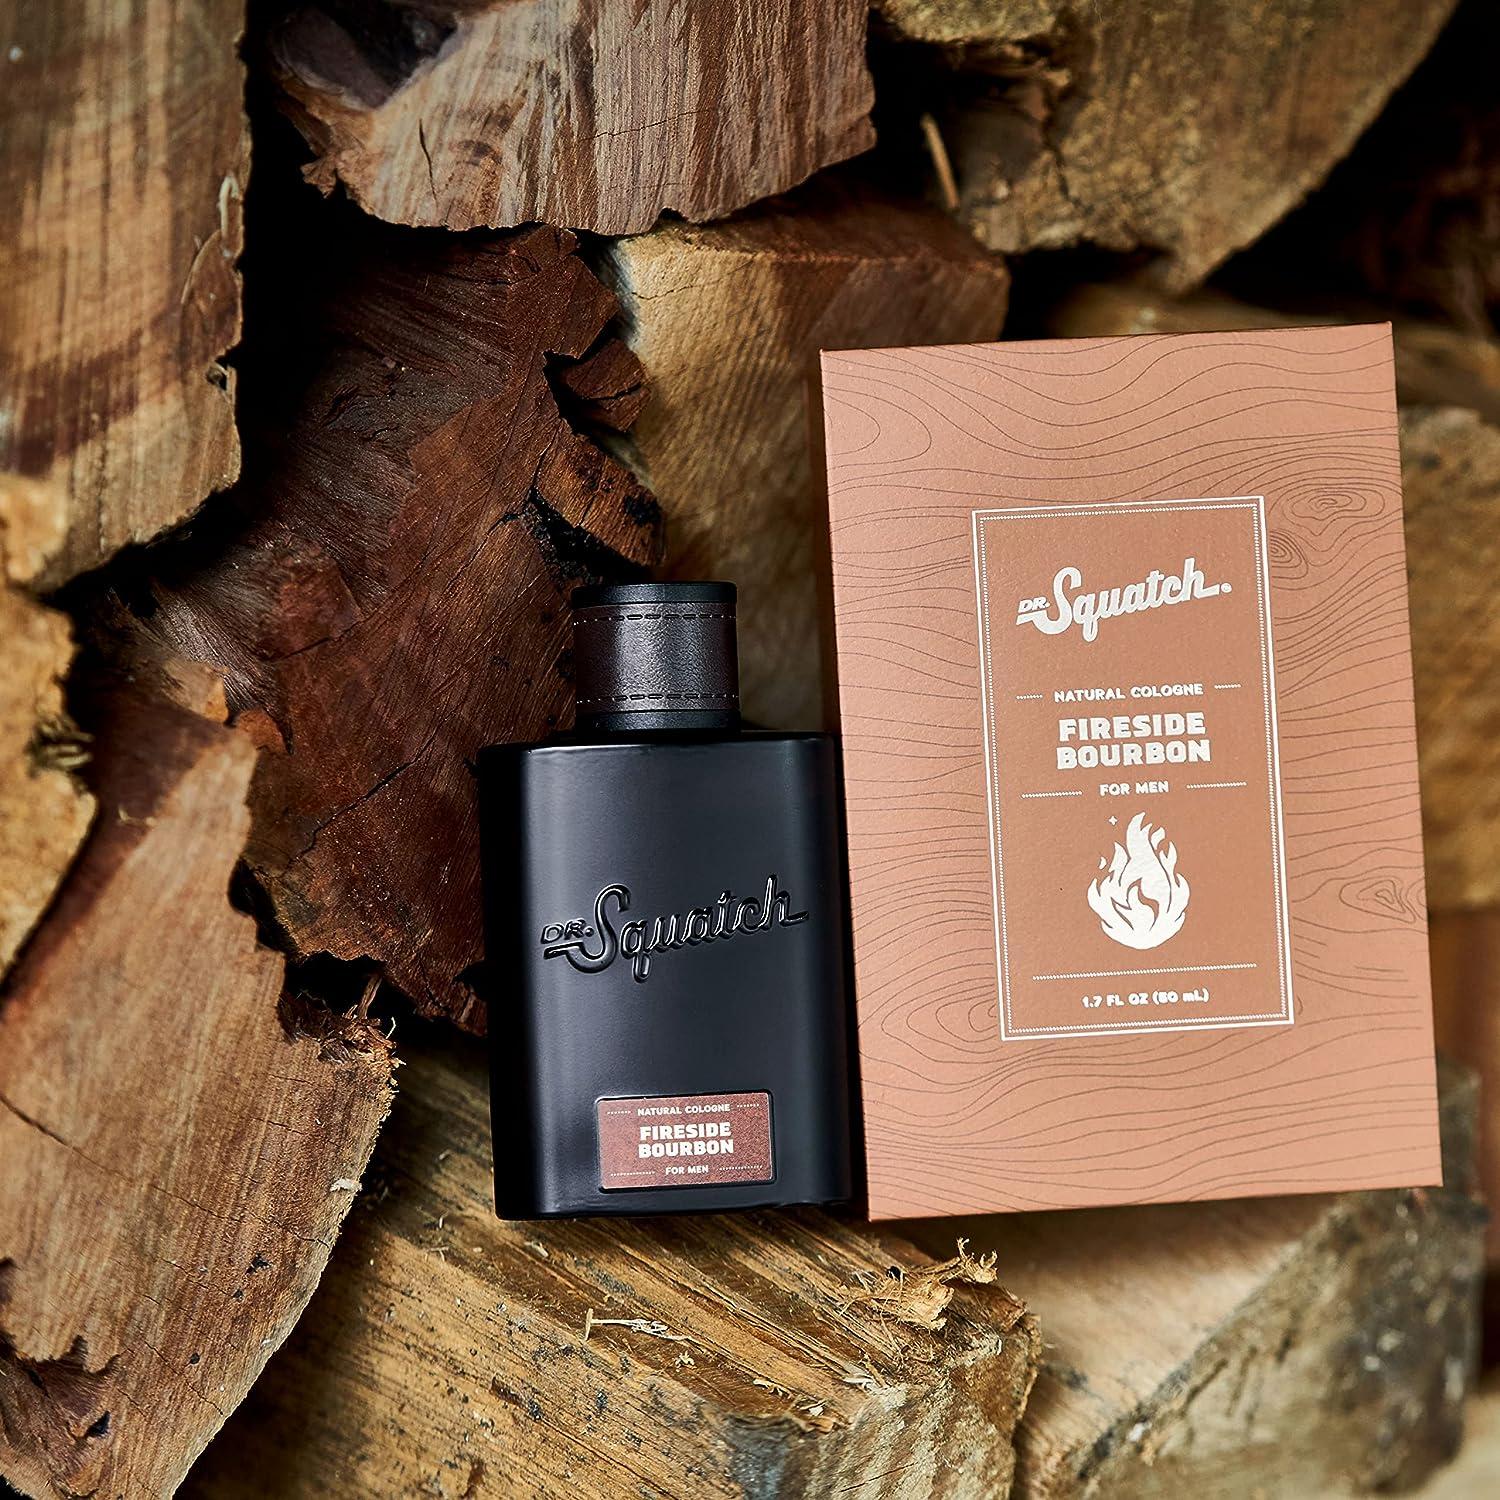 Dr. Squatch's New All-Natural Colognes, Ranked